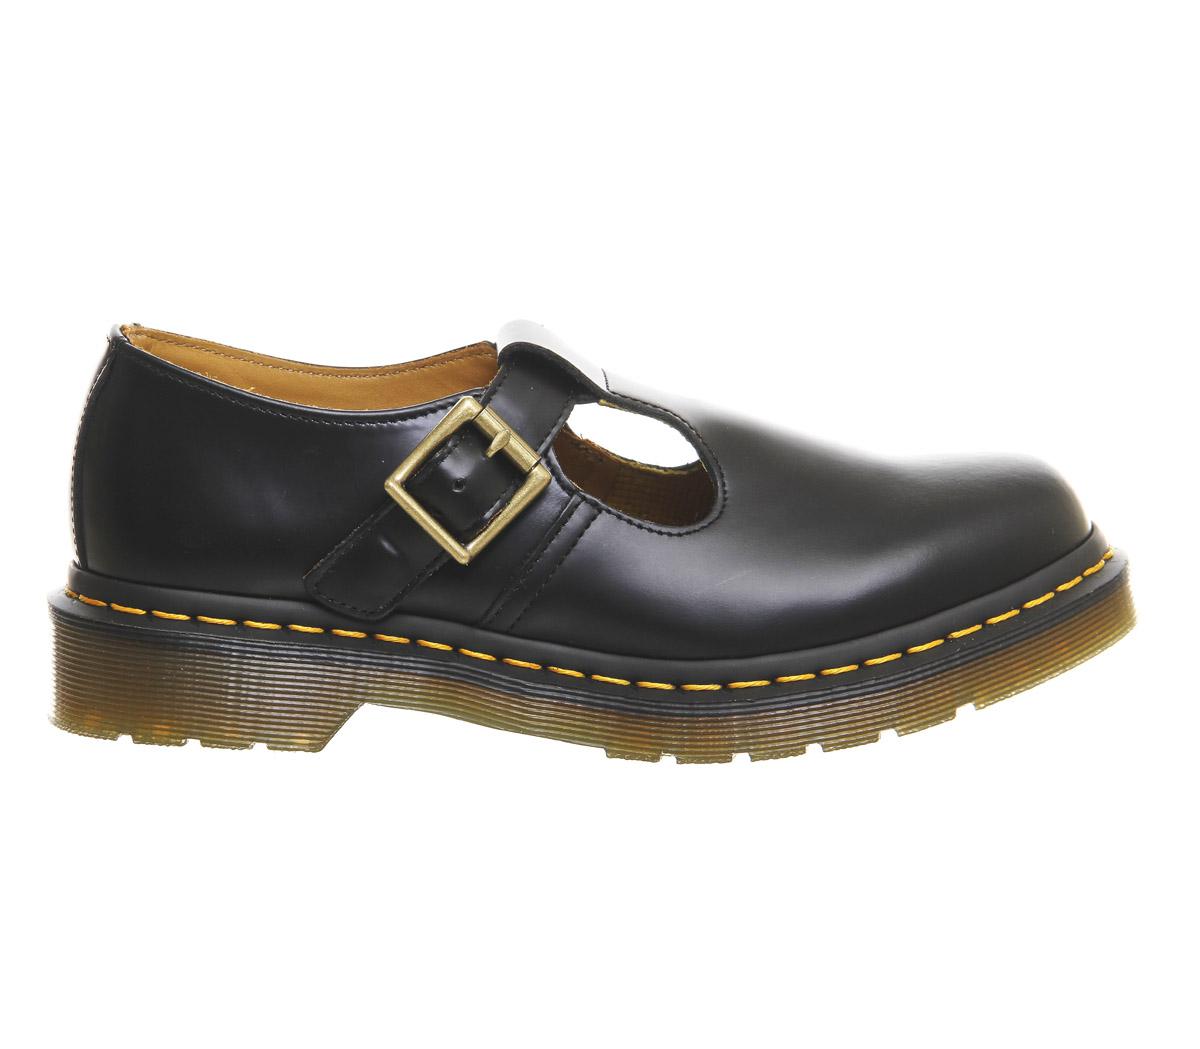 Lyst - Dr. Martens Polley T-bar Shoes in Black